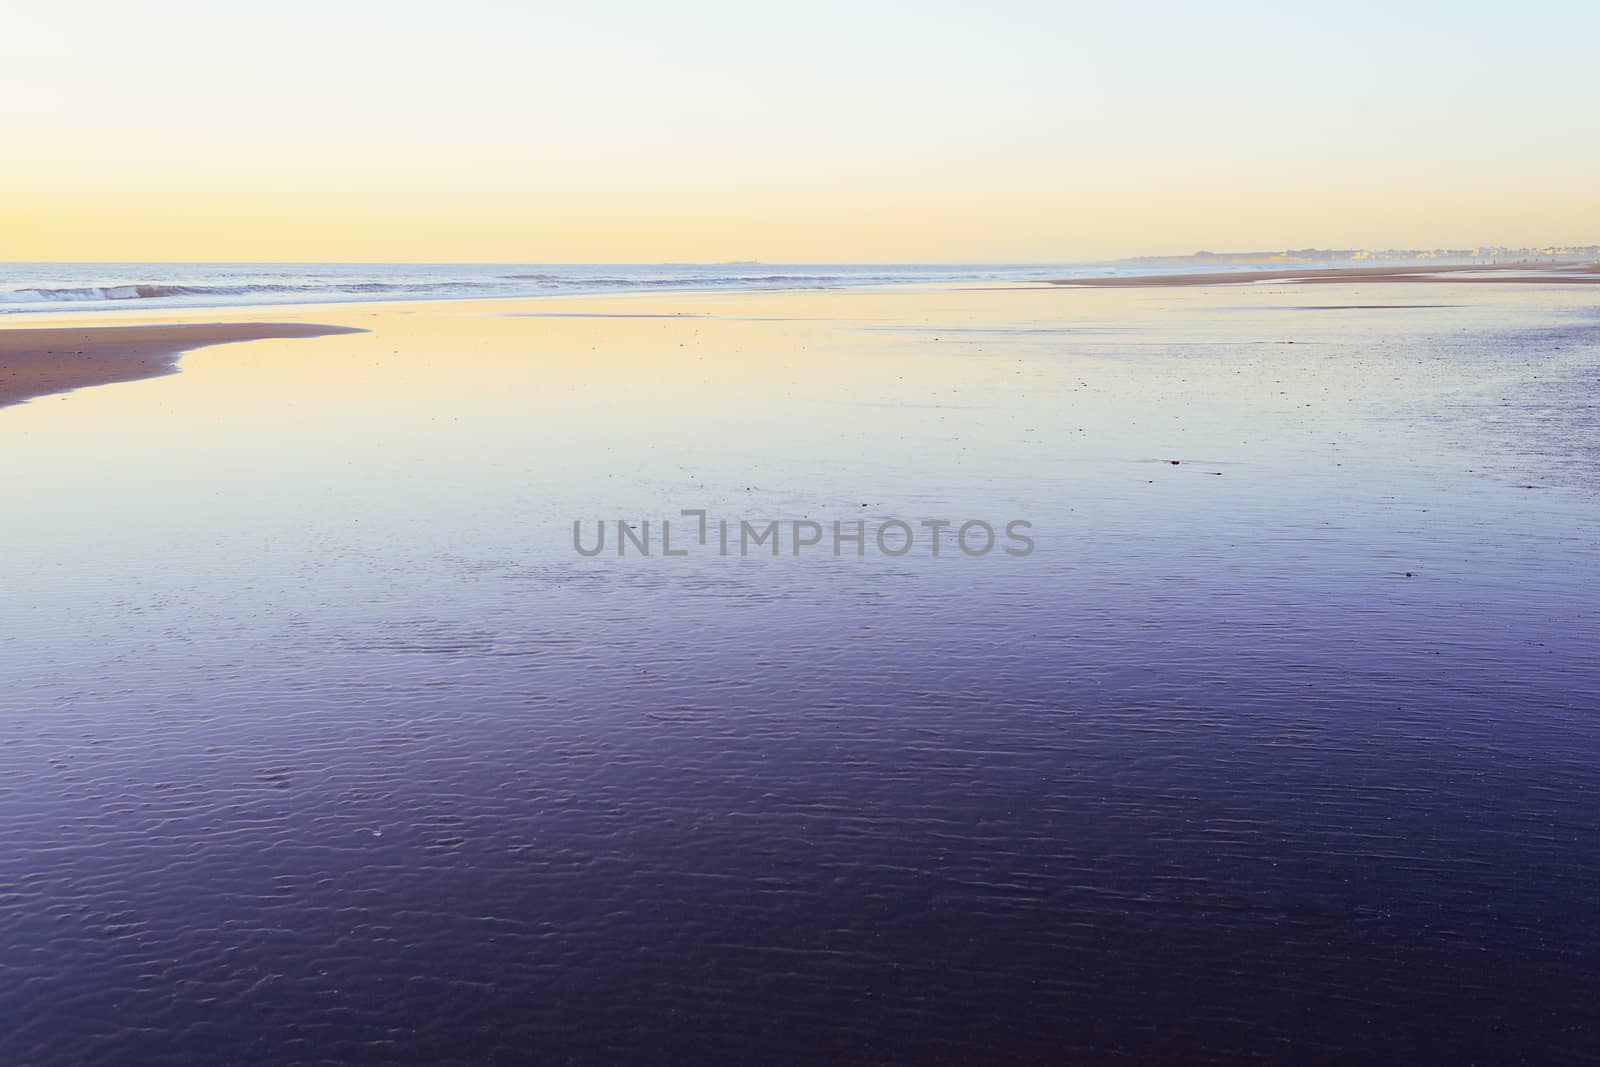 sunset on a lonely beach flooded by low tide, minimalist style